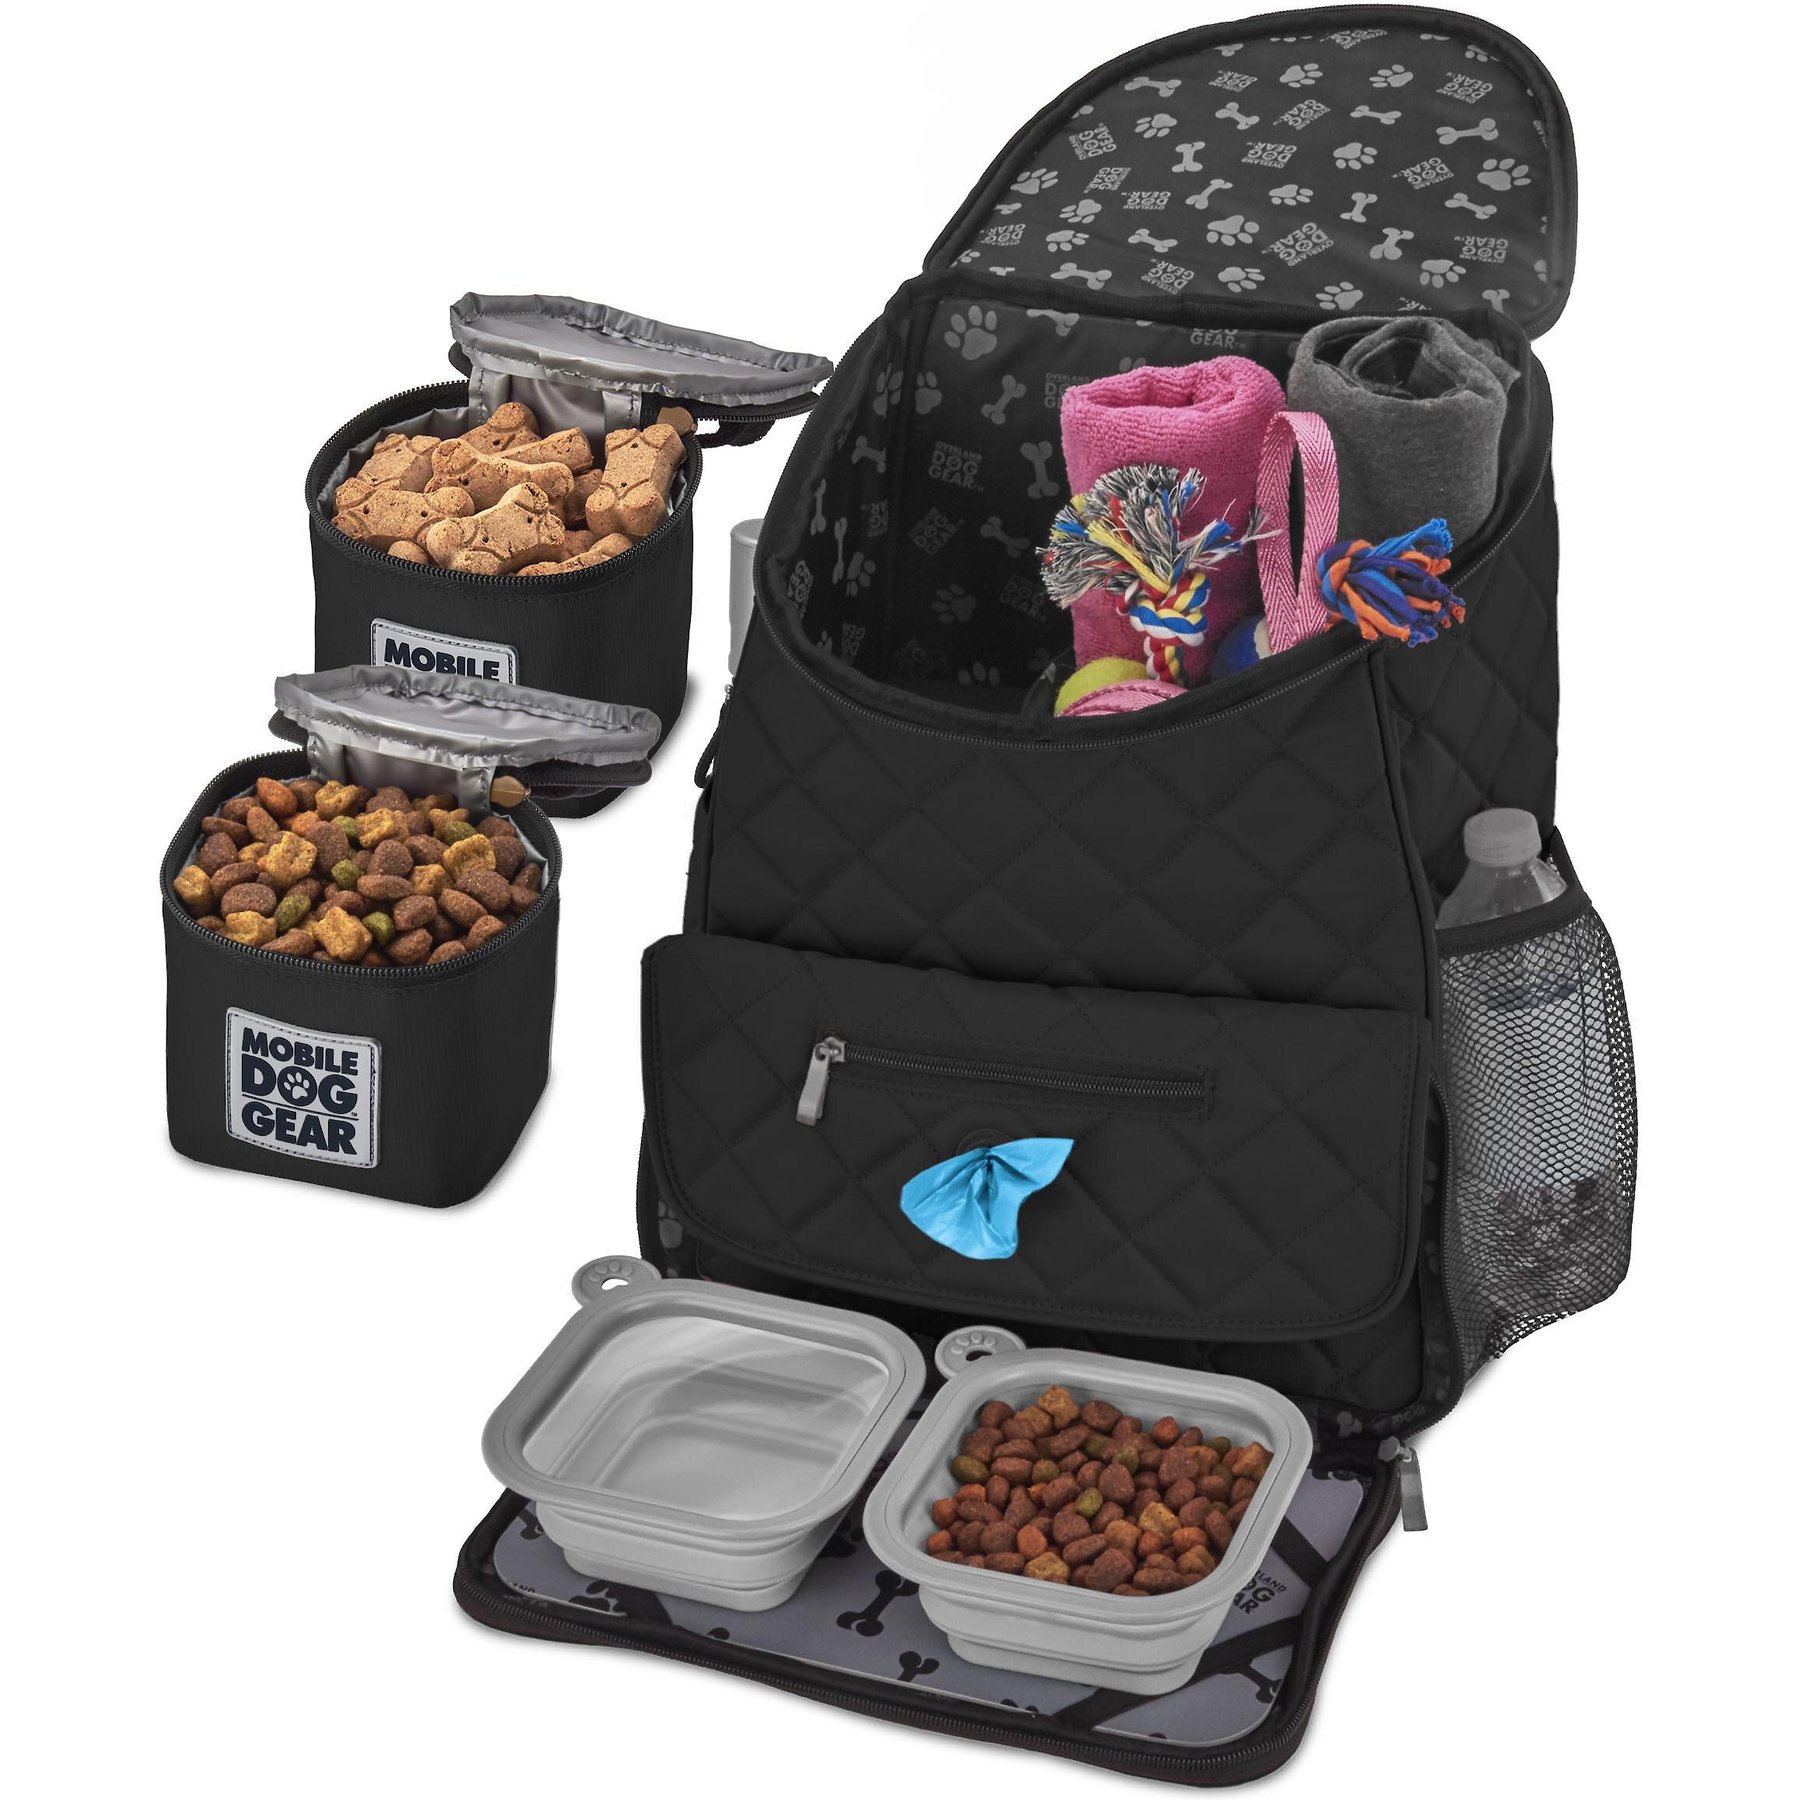 DOG TRAVEL BAG with Food Container Collapsible Bowl Set Airline